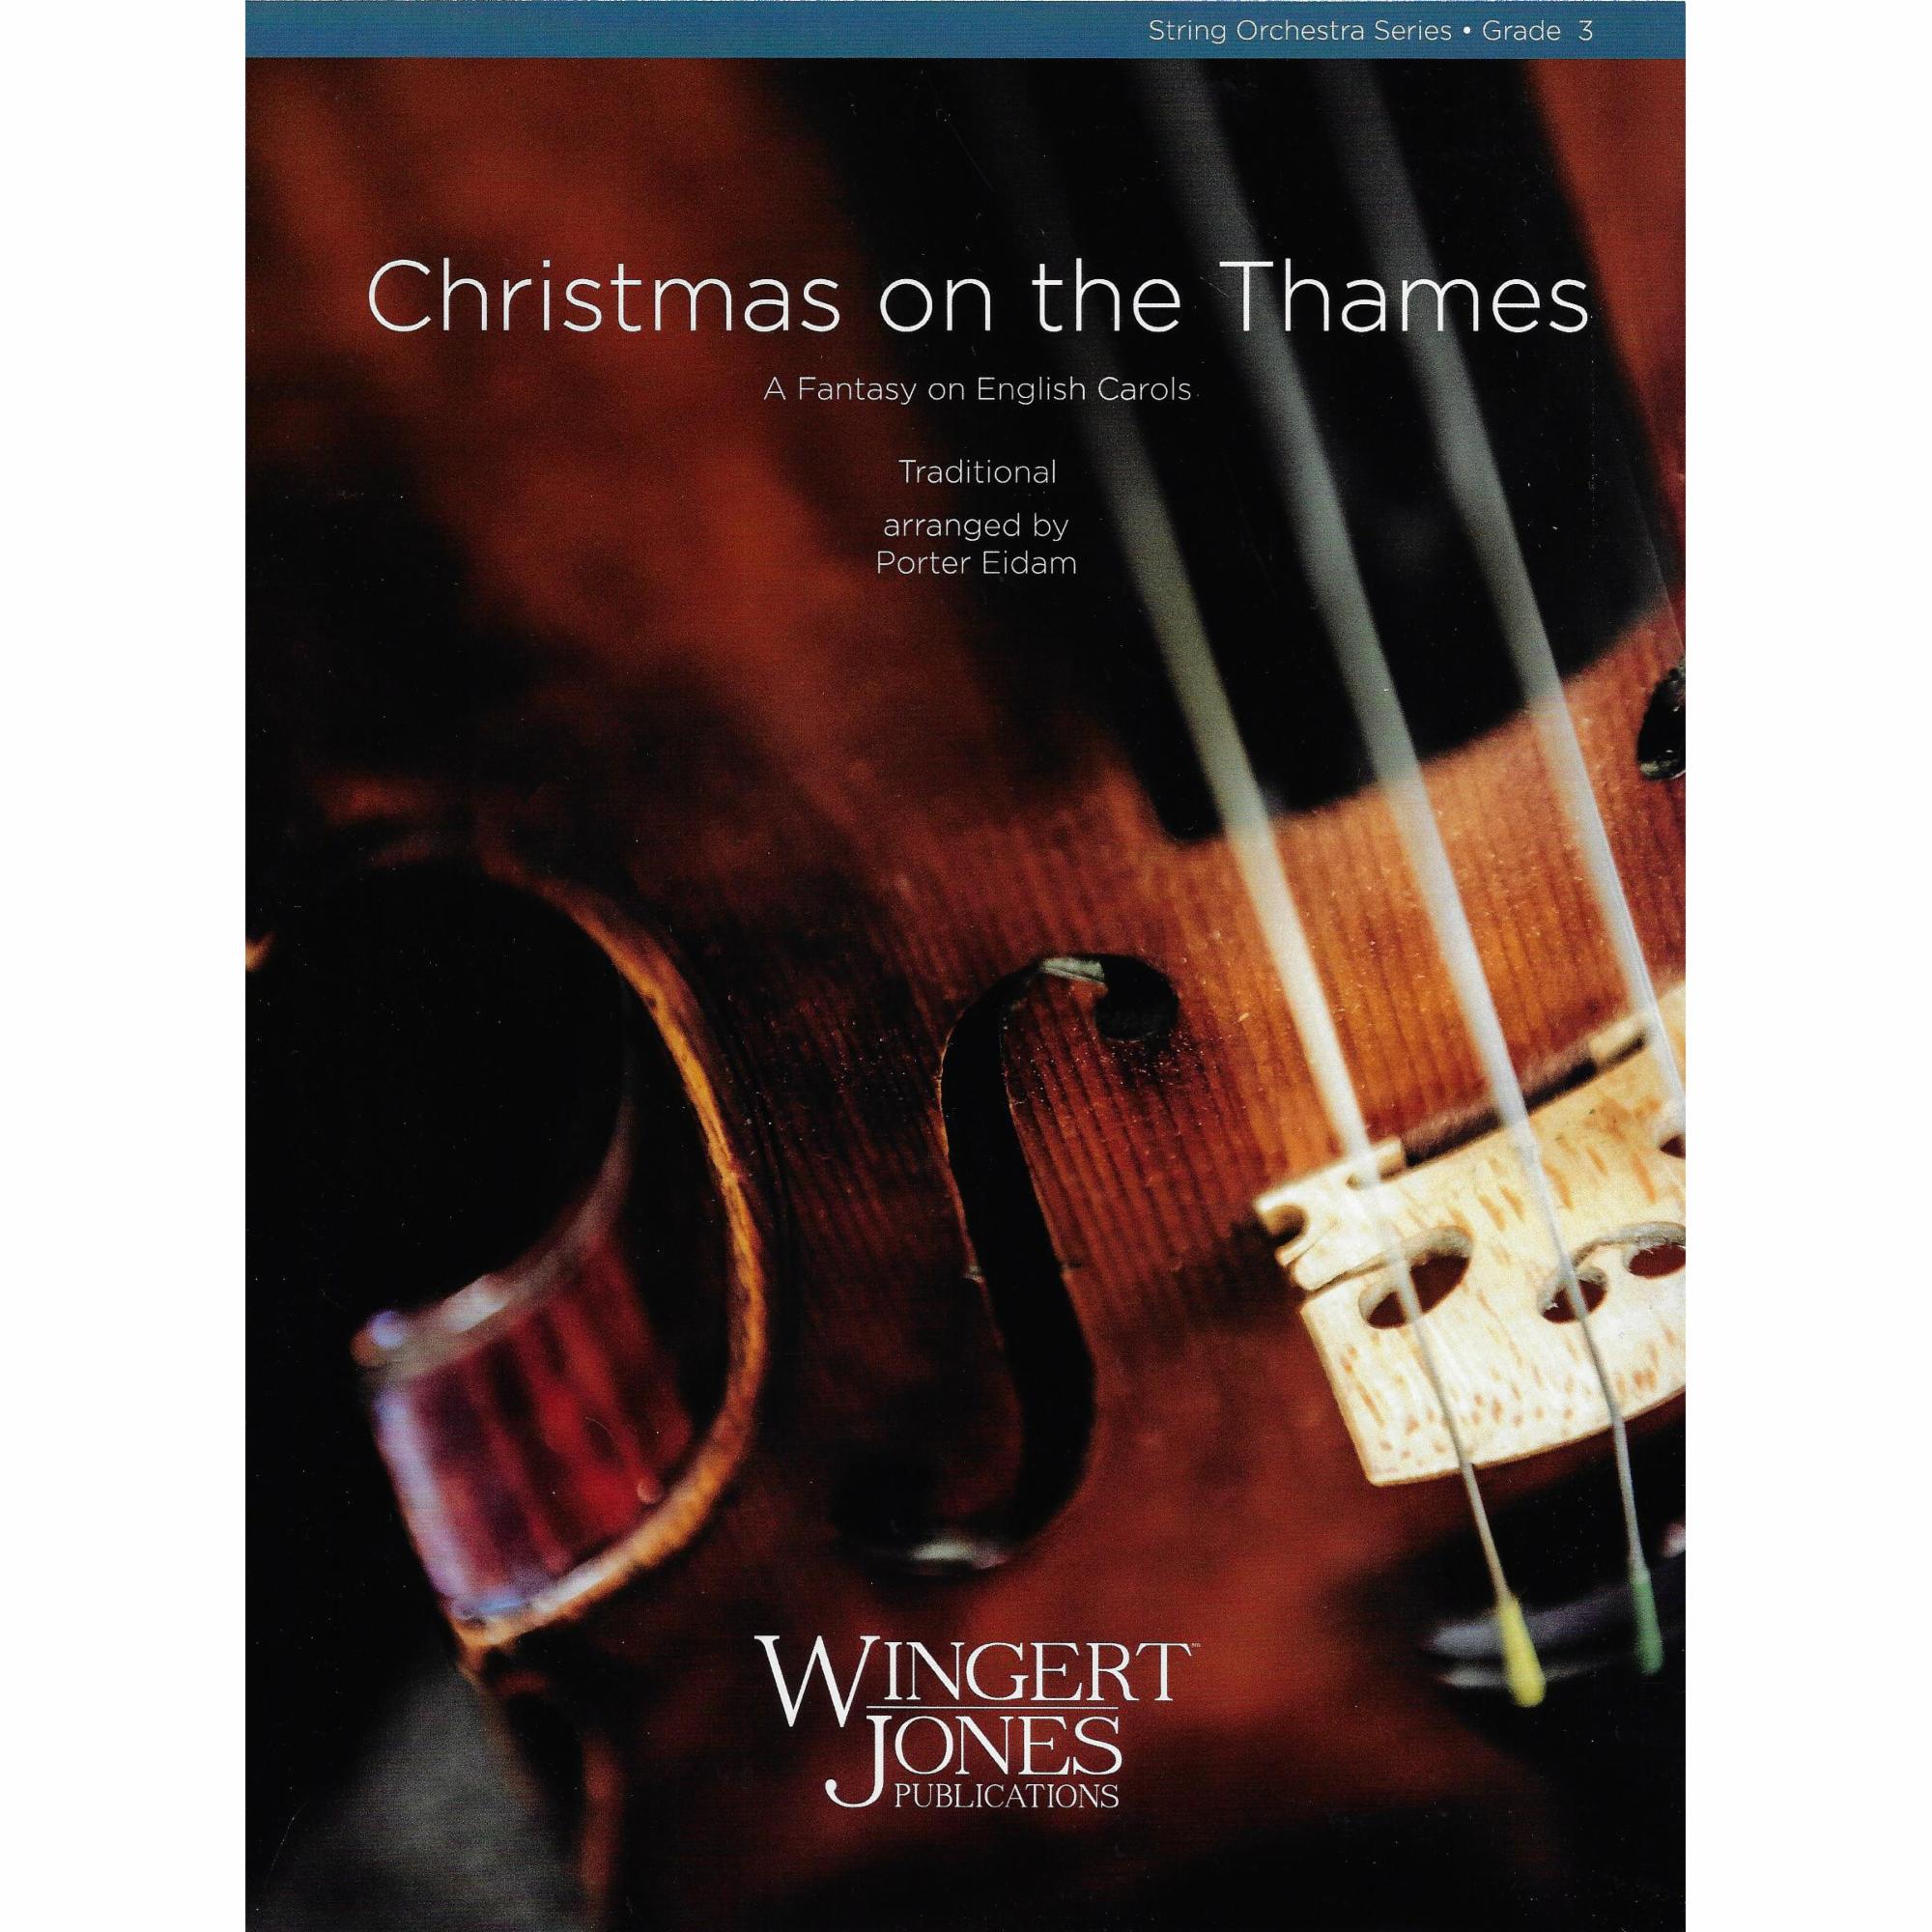 Christmas on the Thames: A Fantasy on English Carols for String Orchestra